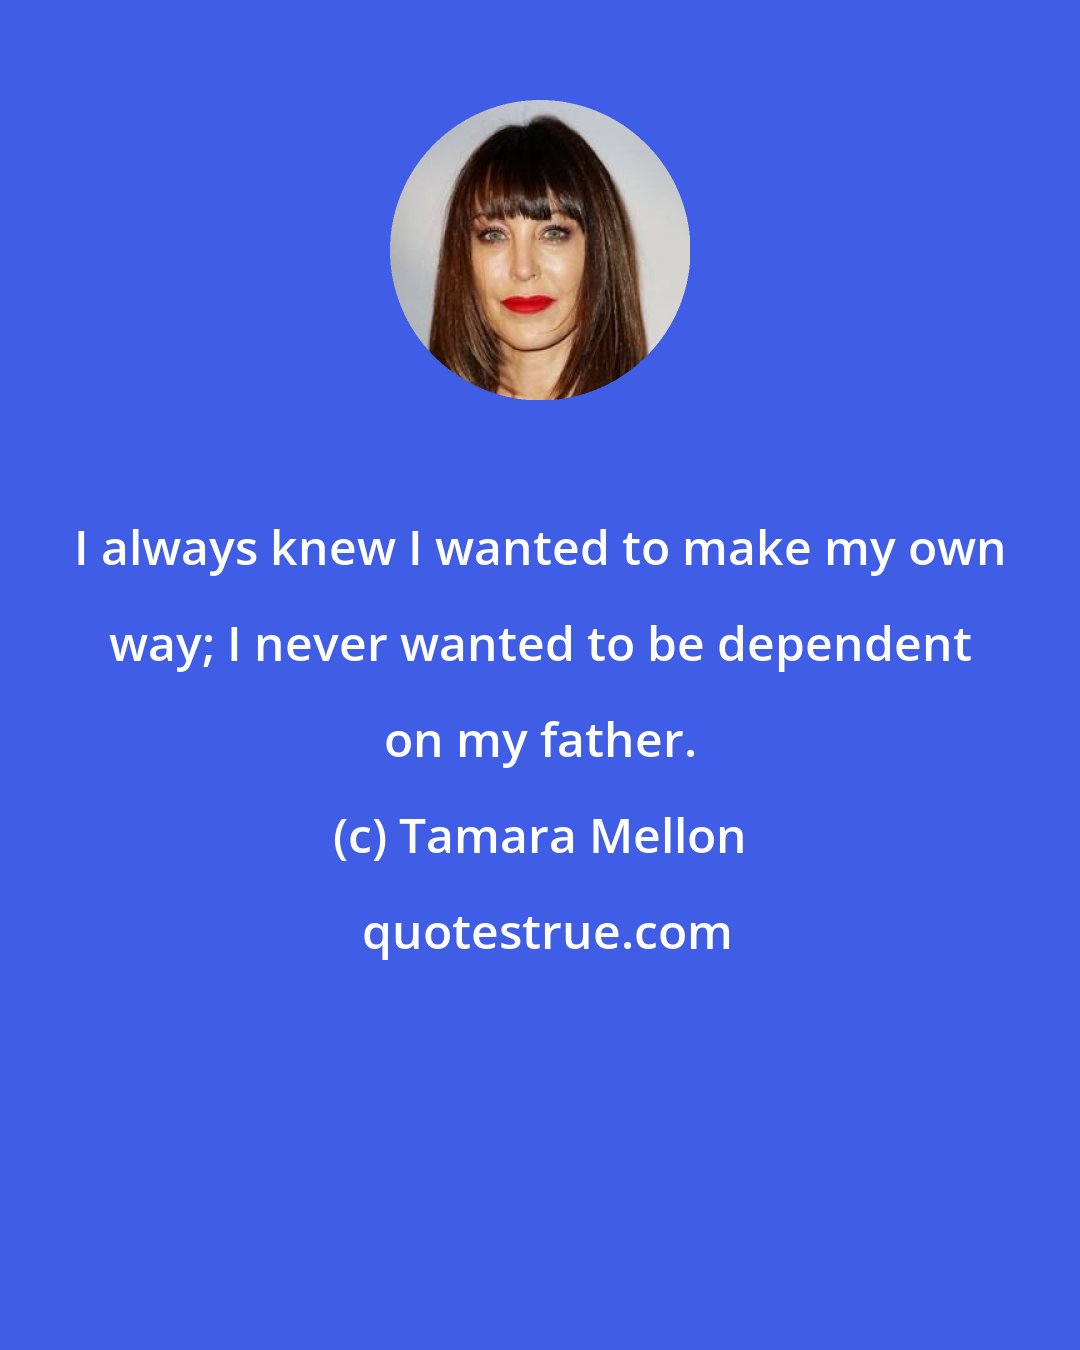 Tamara Mellon: I always knew I wanted to make my own way; I never wanted to be dependent on my father.